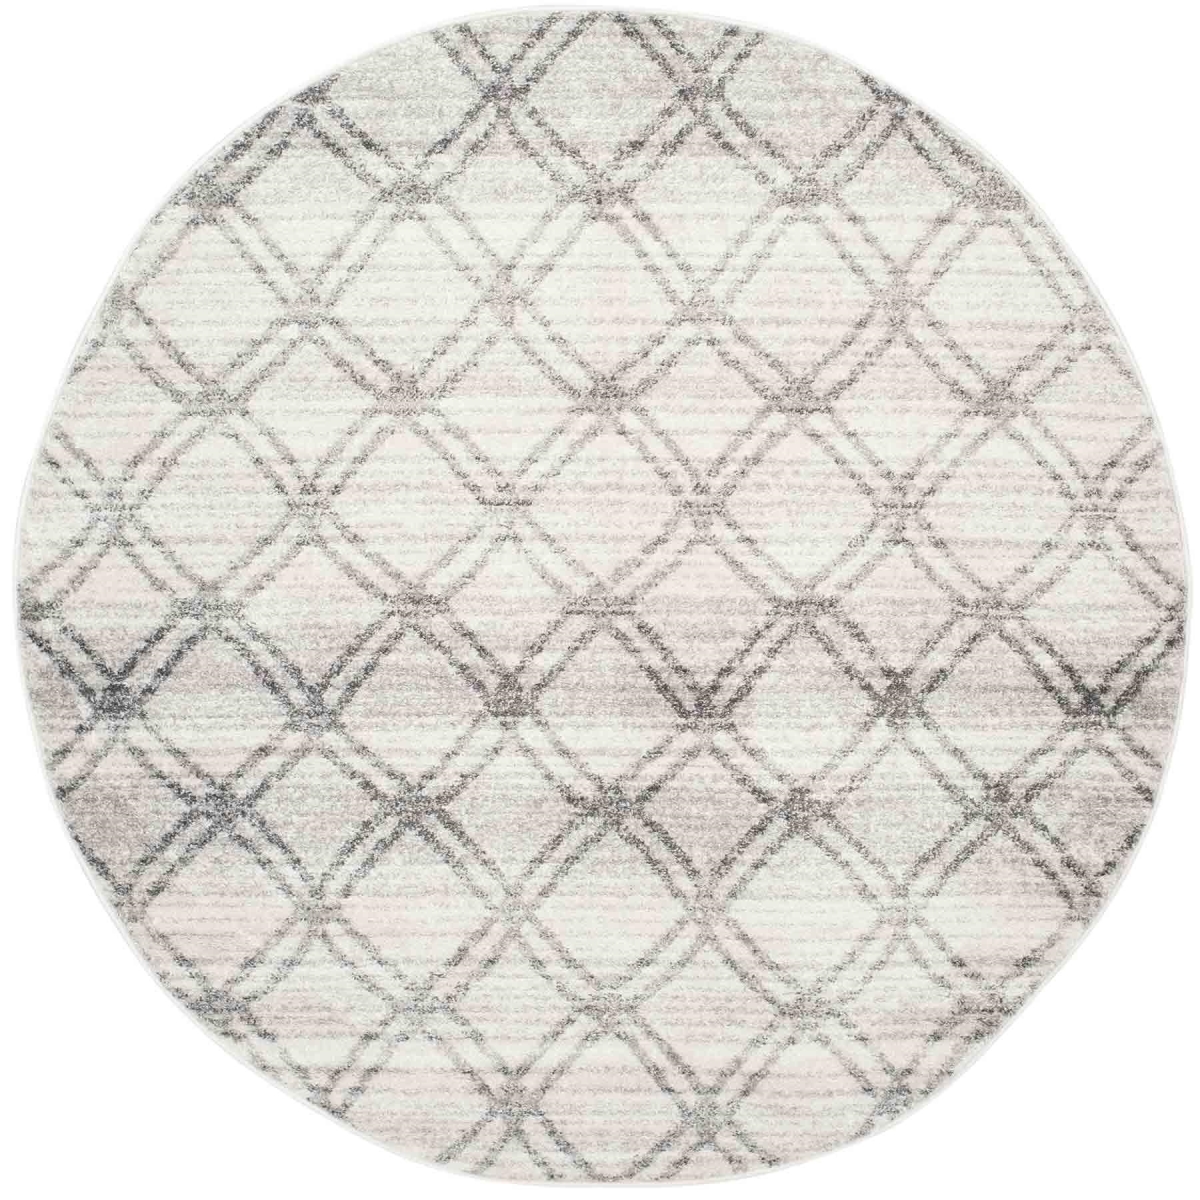 Adr105p-4r Adirondack Round Area Rug, Silver & Charcoal - 4 X 4 Ft.